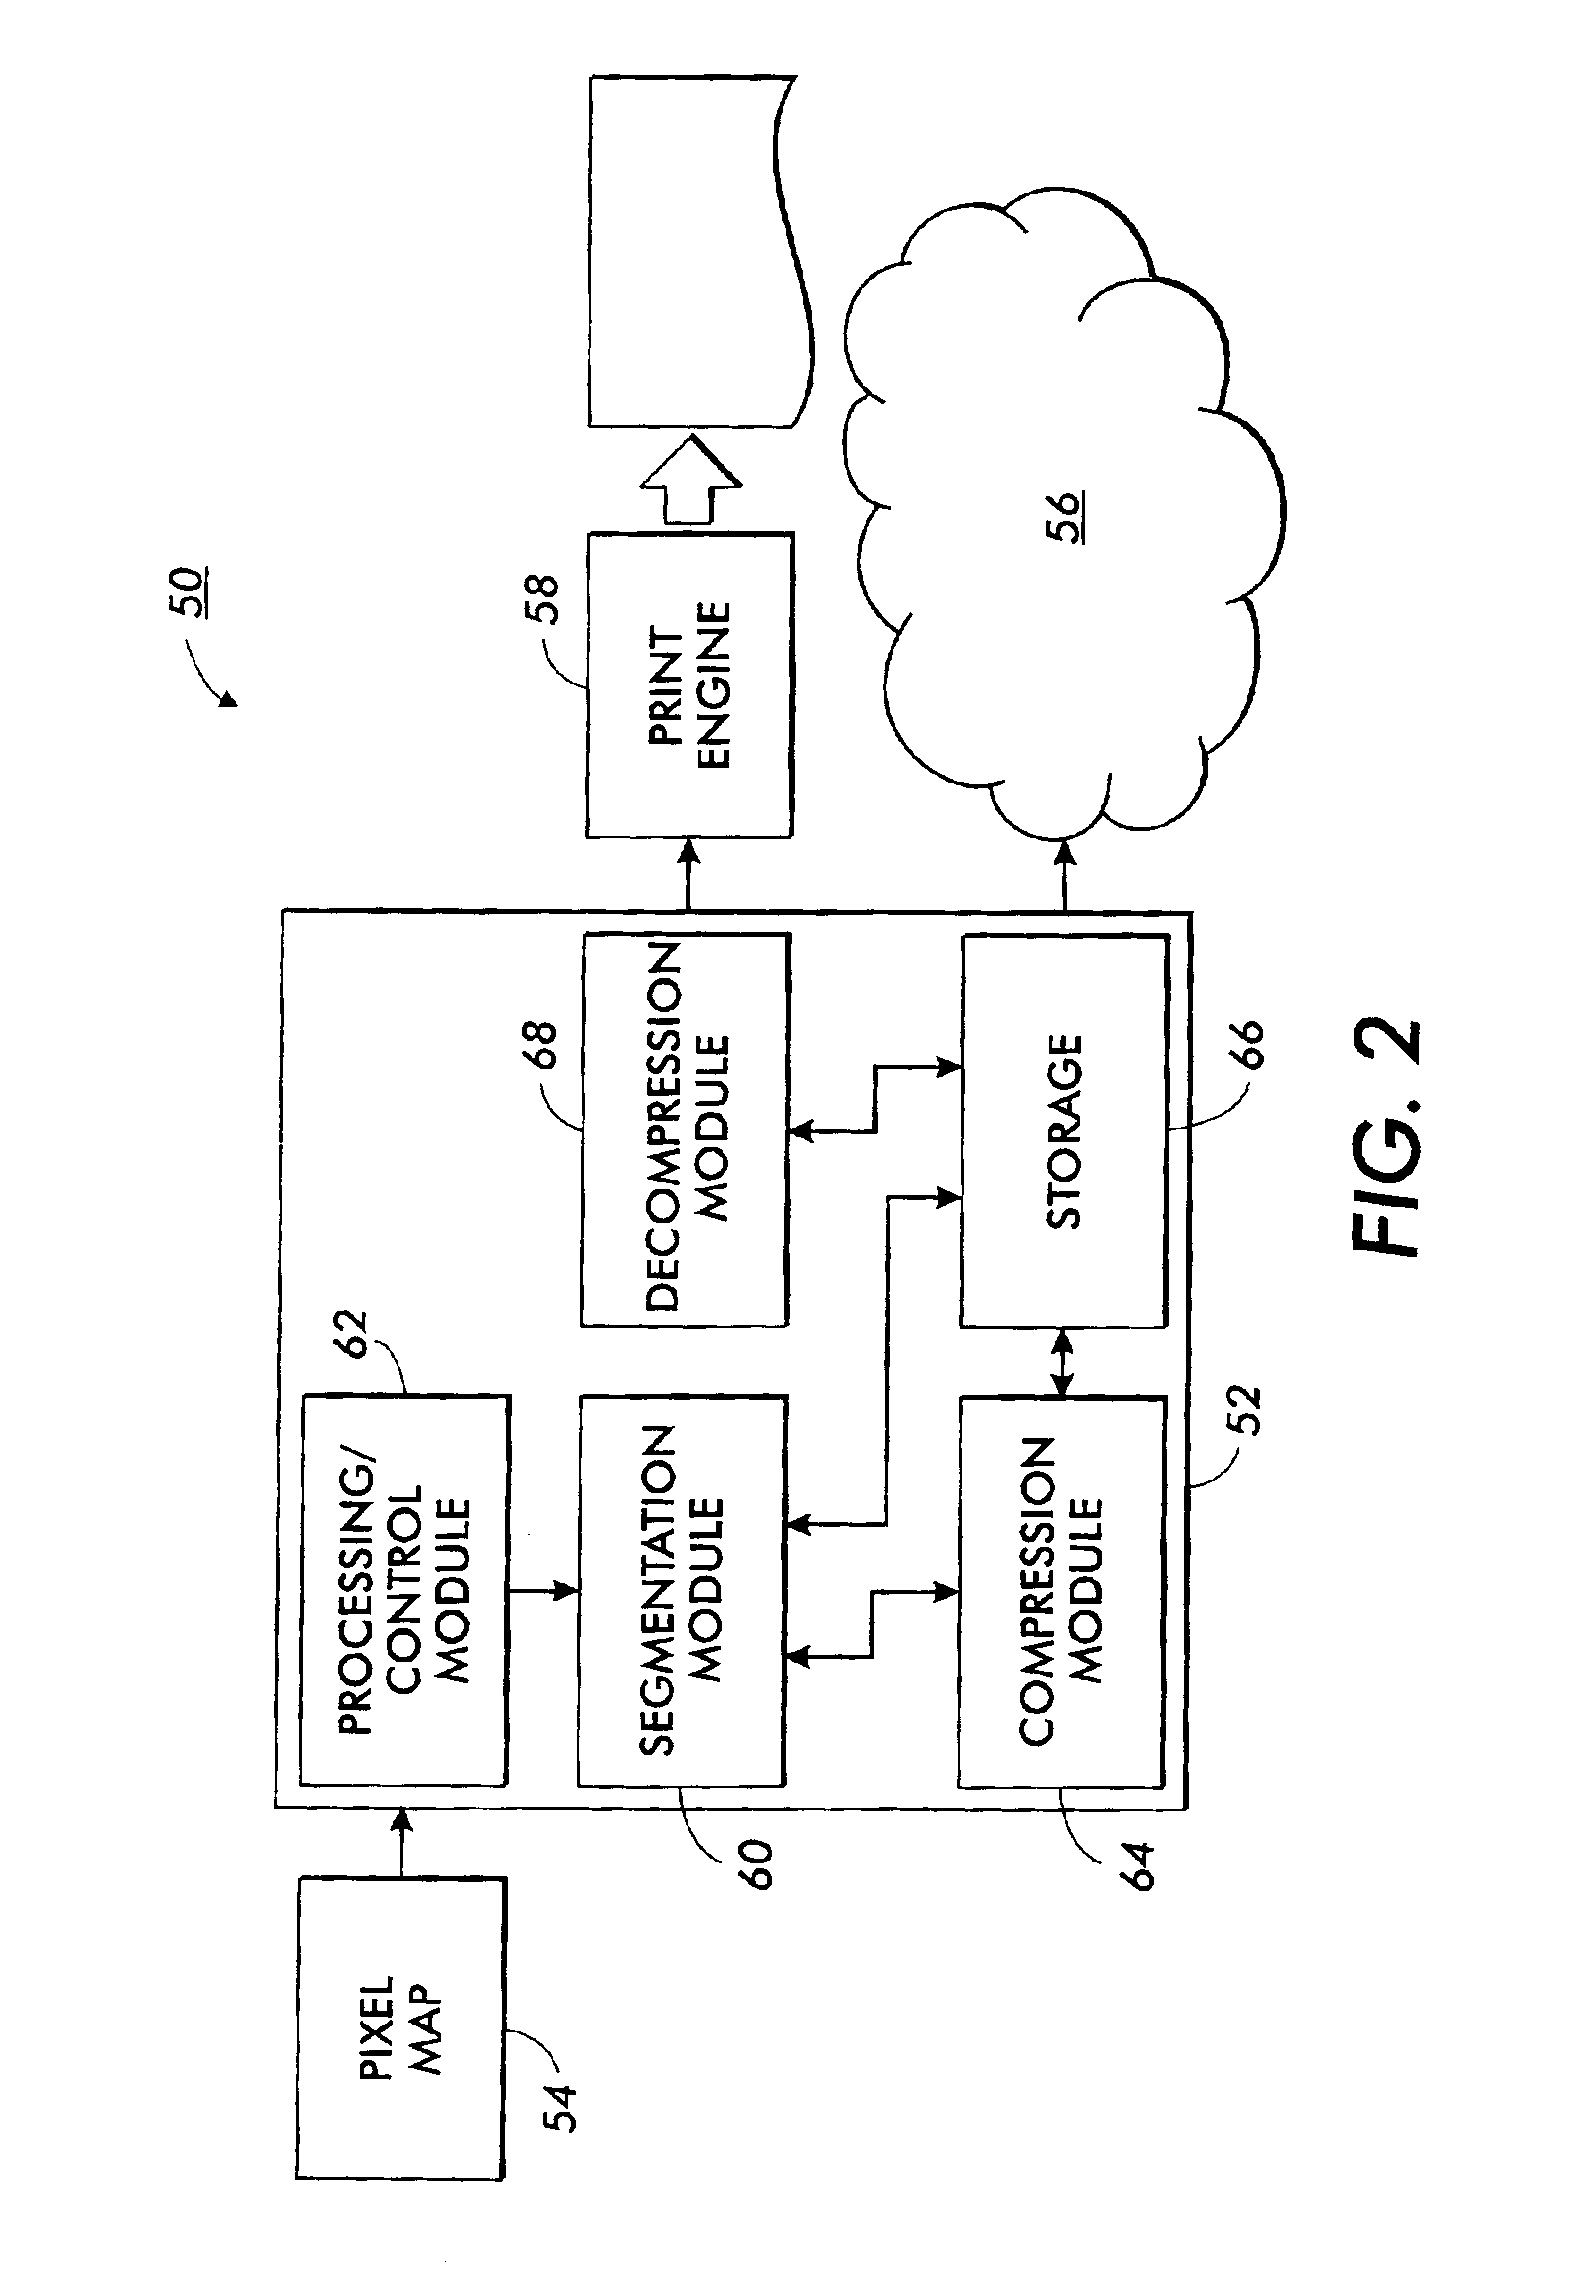 Method and apparatus for segmenting an image using a combination of image segmentation techniques